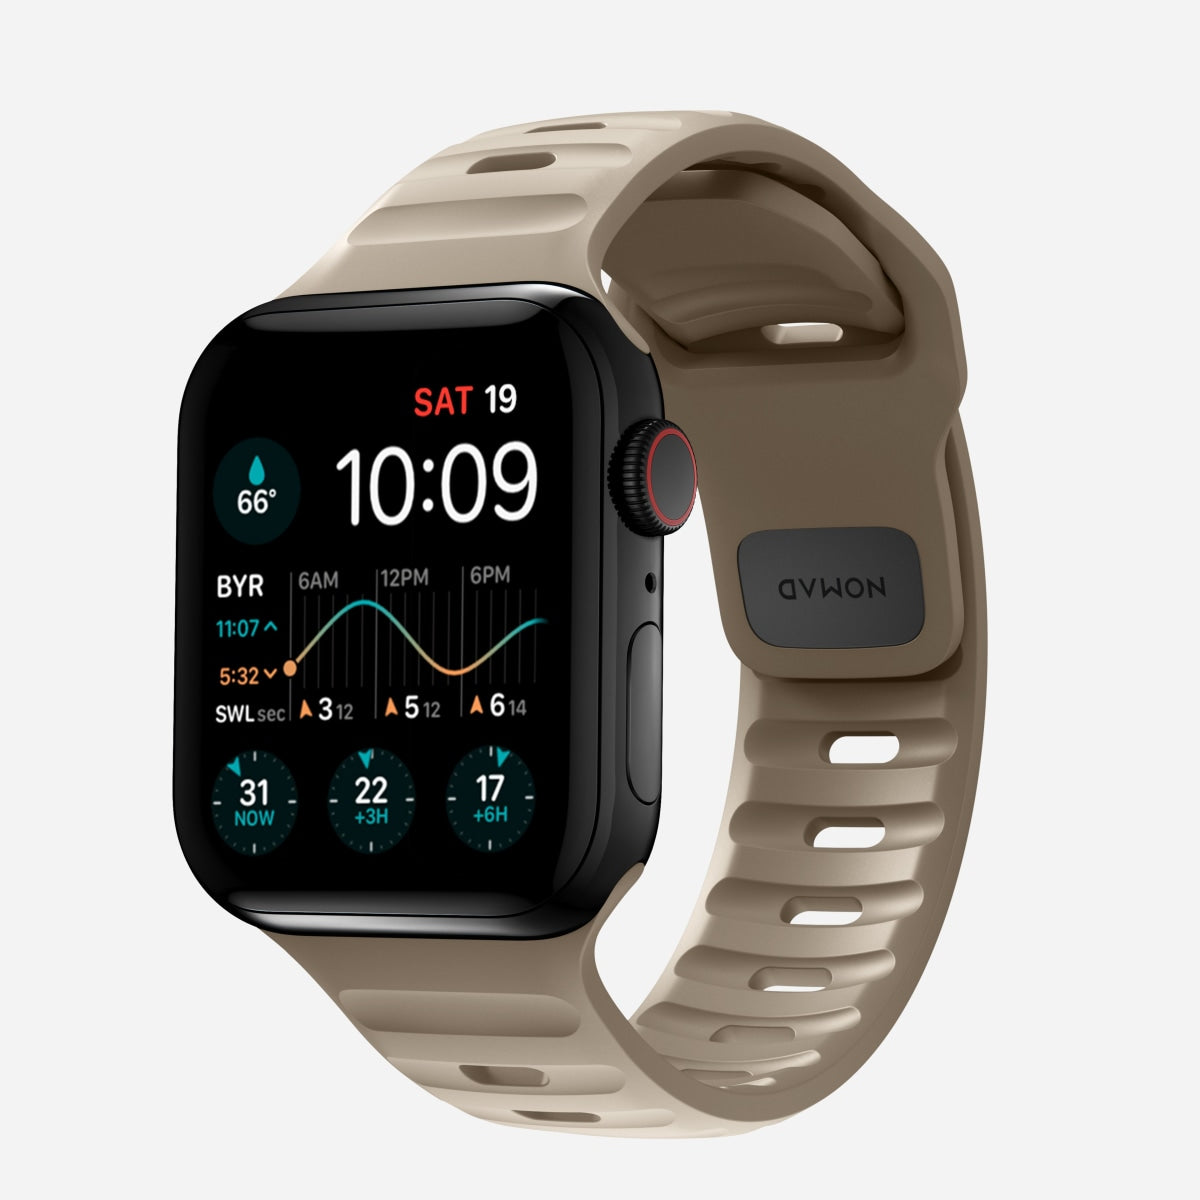 Nomad Sport Band for Apple Watch - Storming Gravity